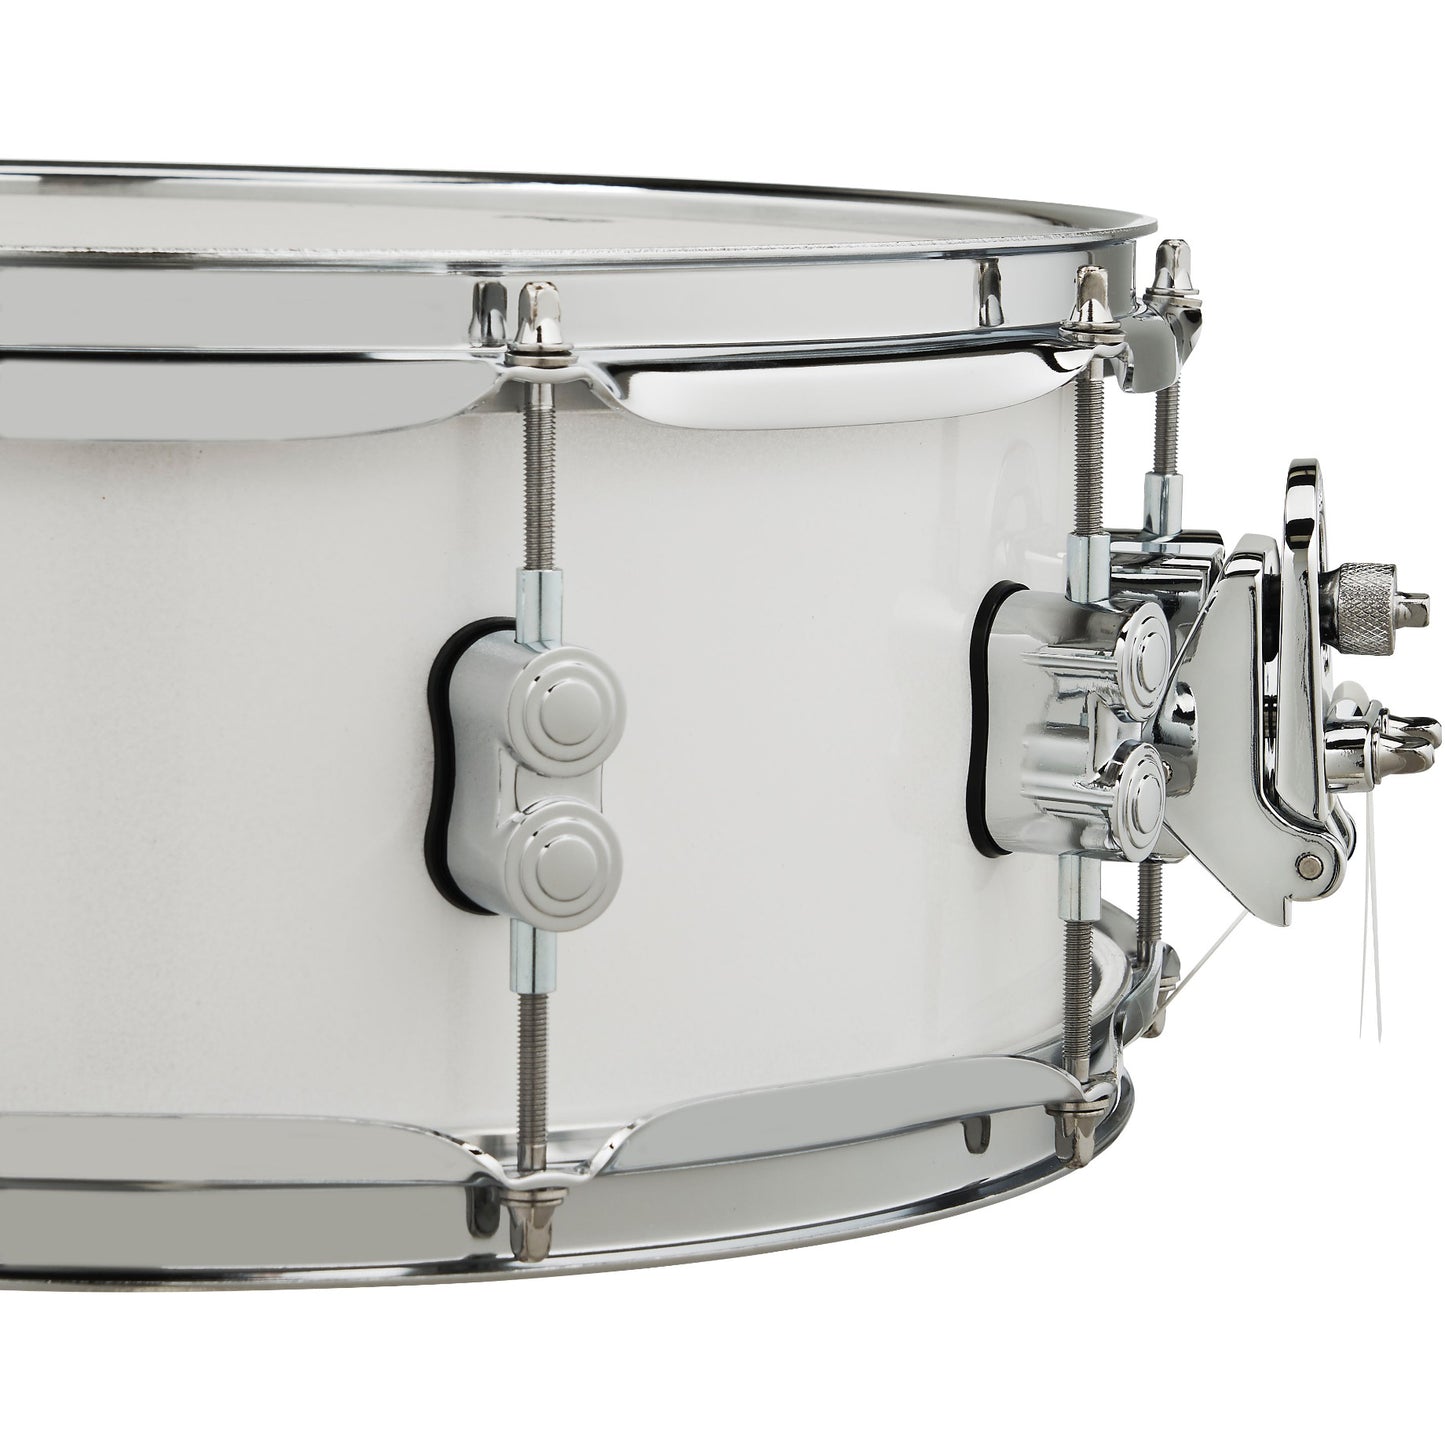 Pacific Drums & Percussion Concept Maple 5.5x14 Snare Drum - Pearlescent White